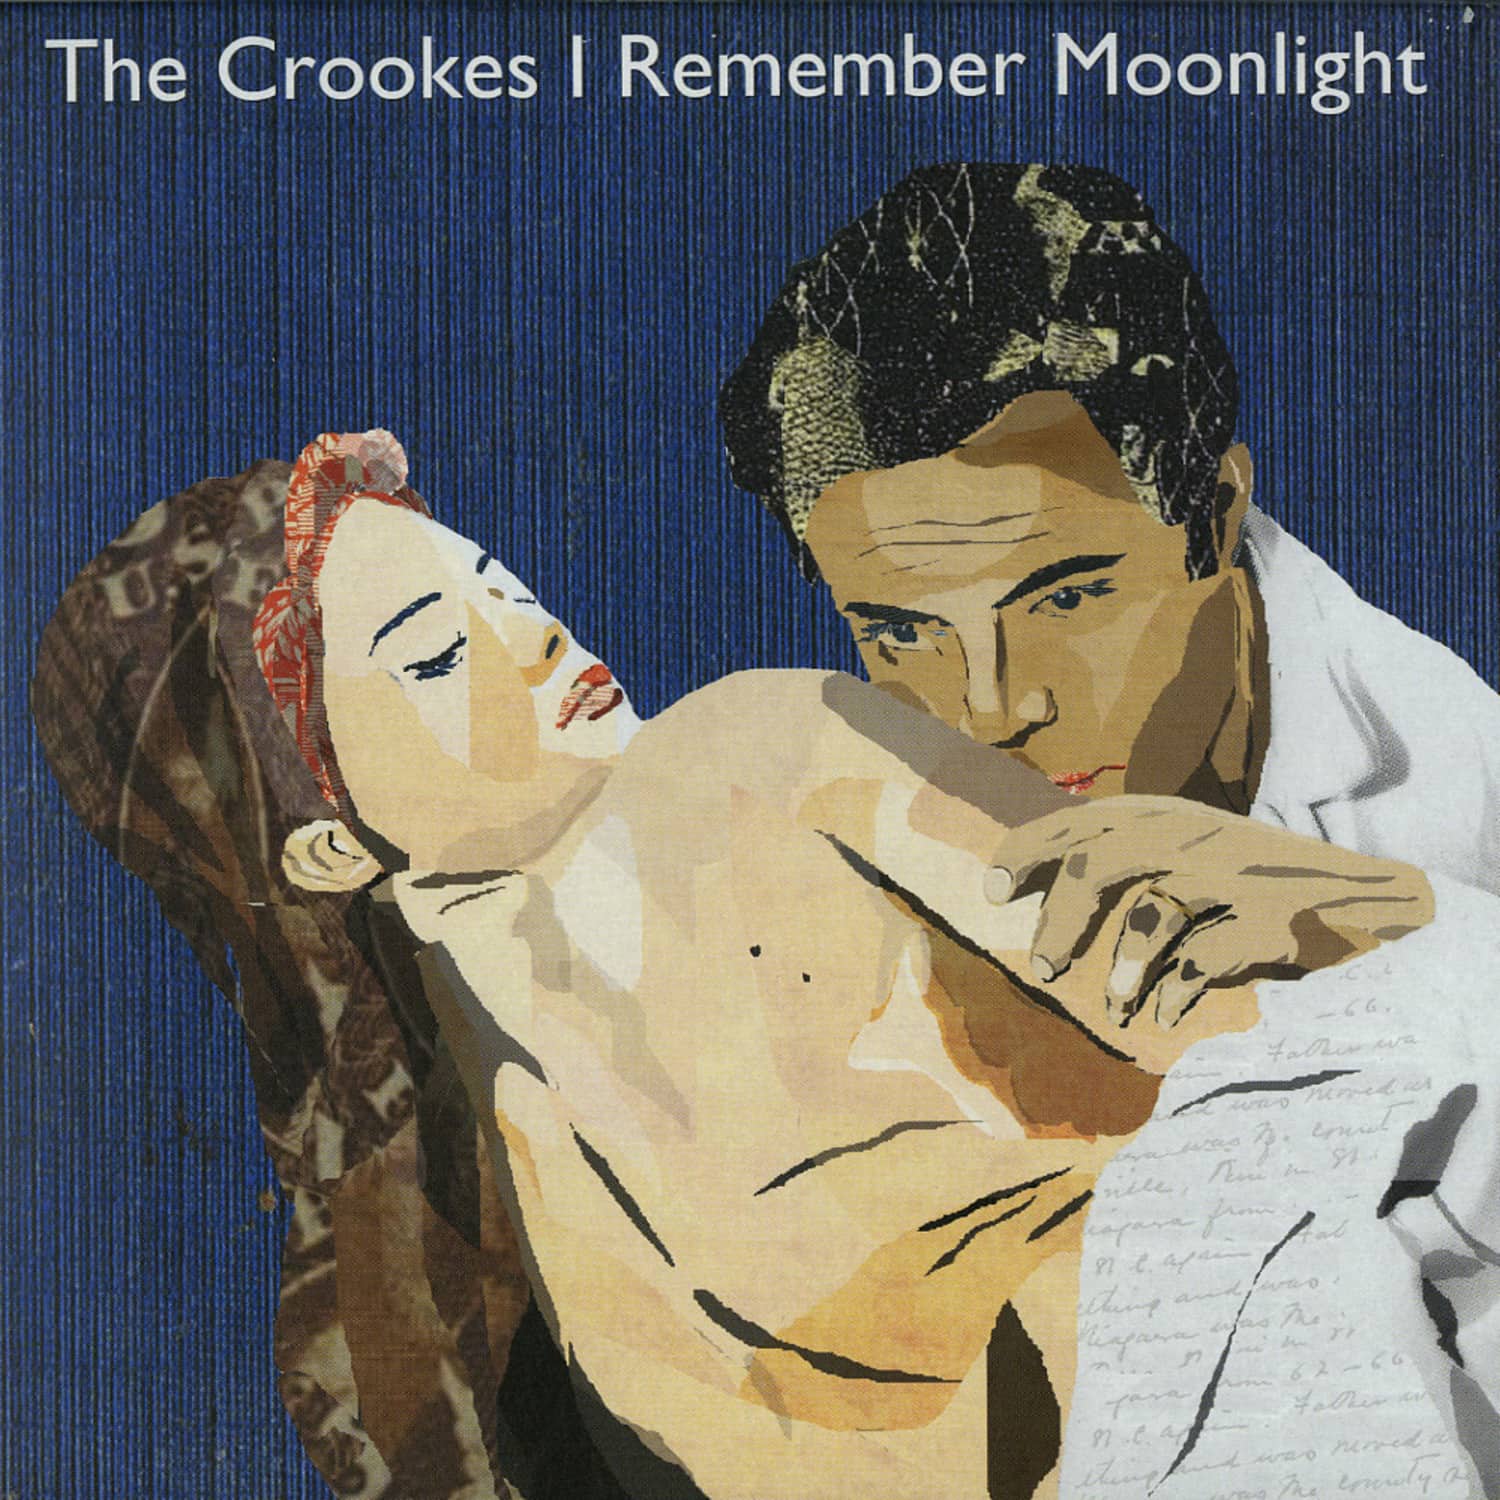 The Crookes - I REMEMBER MOONLIGHT 